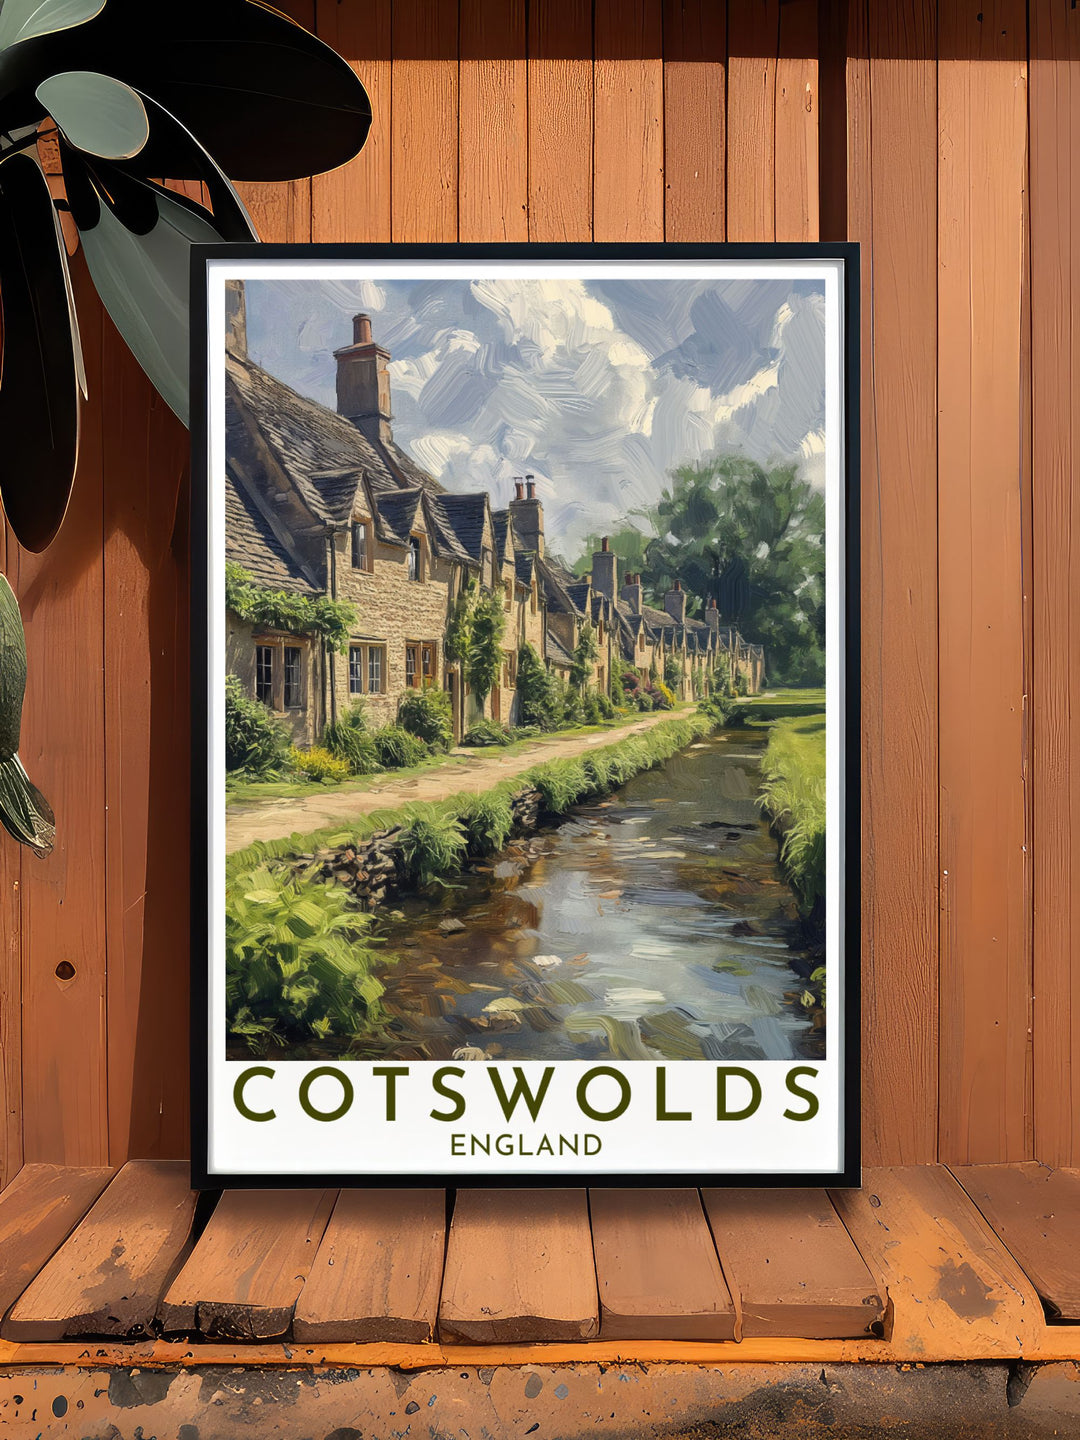 The captivating blend of nature in the Cotswolds and the historic streets of Arlington Row is beautifully illustrated in this poster, making it a stunning addition to any wall art collection celebrating England.